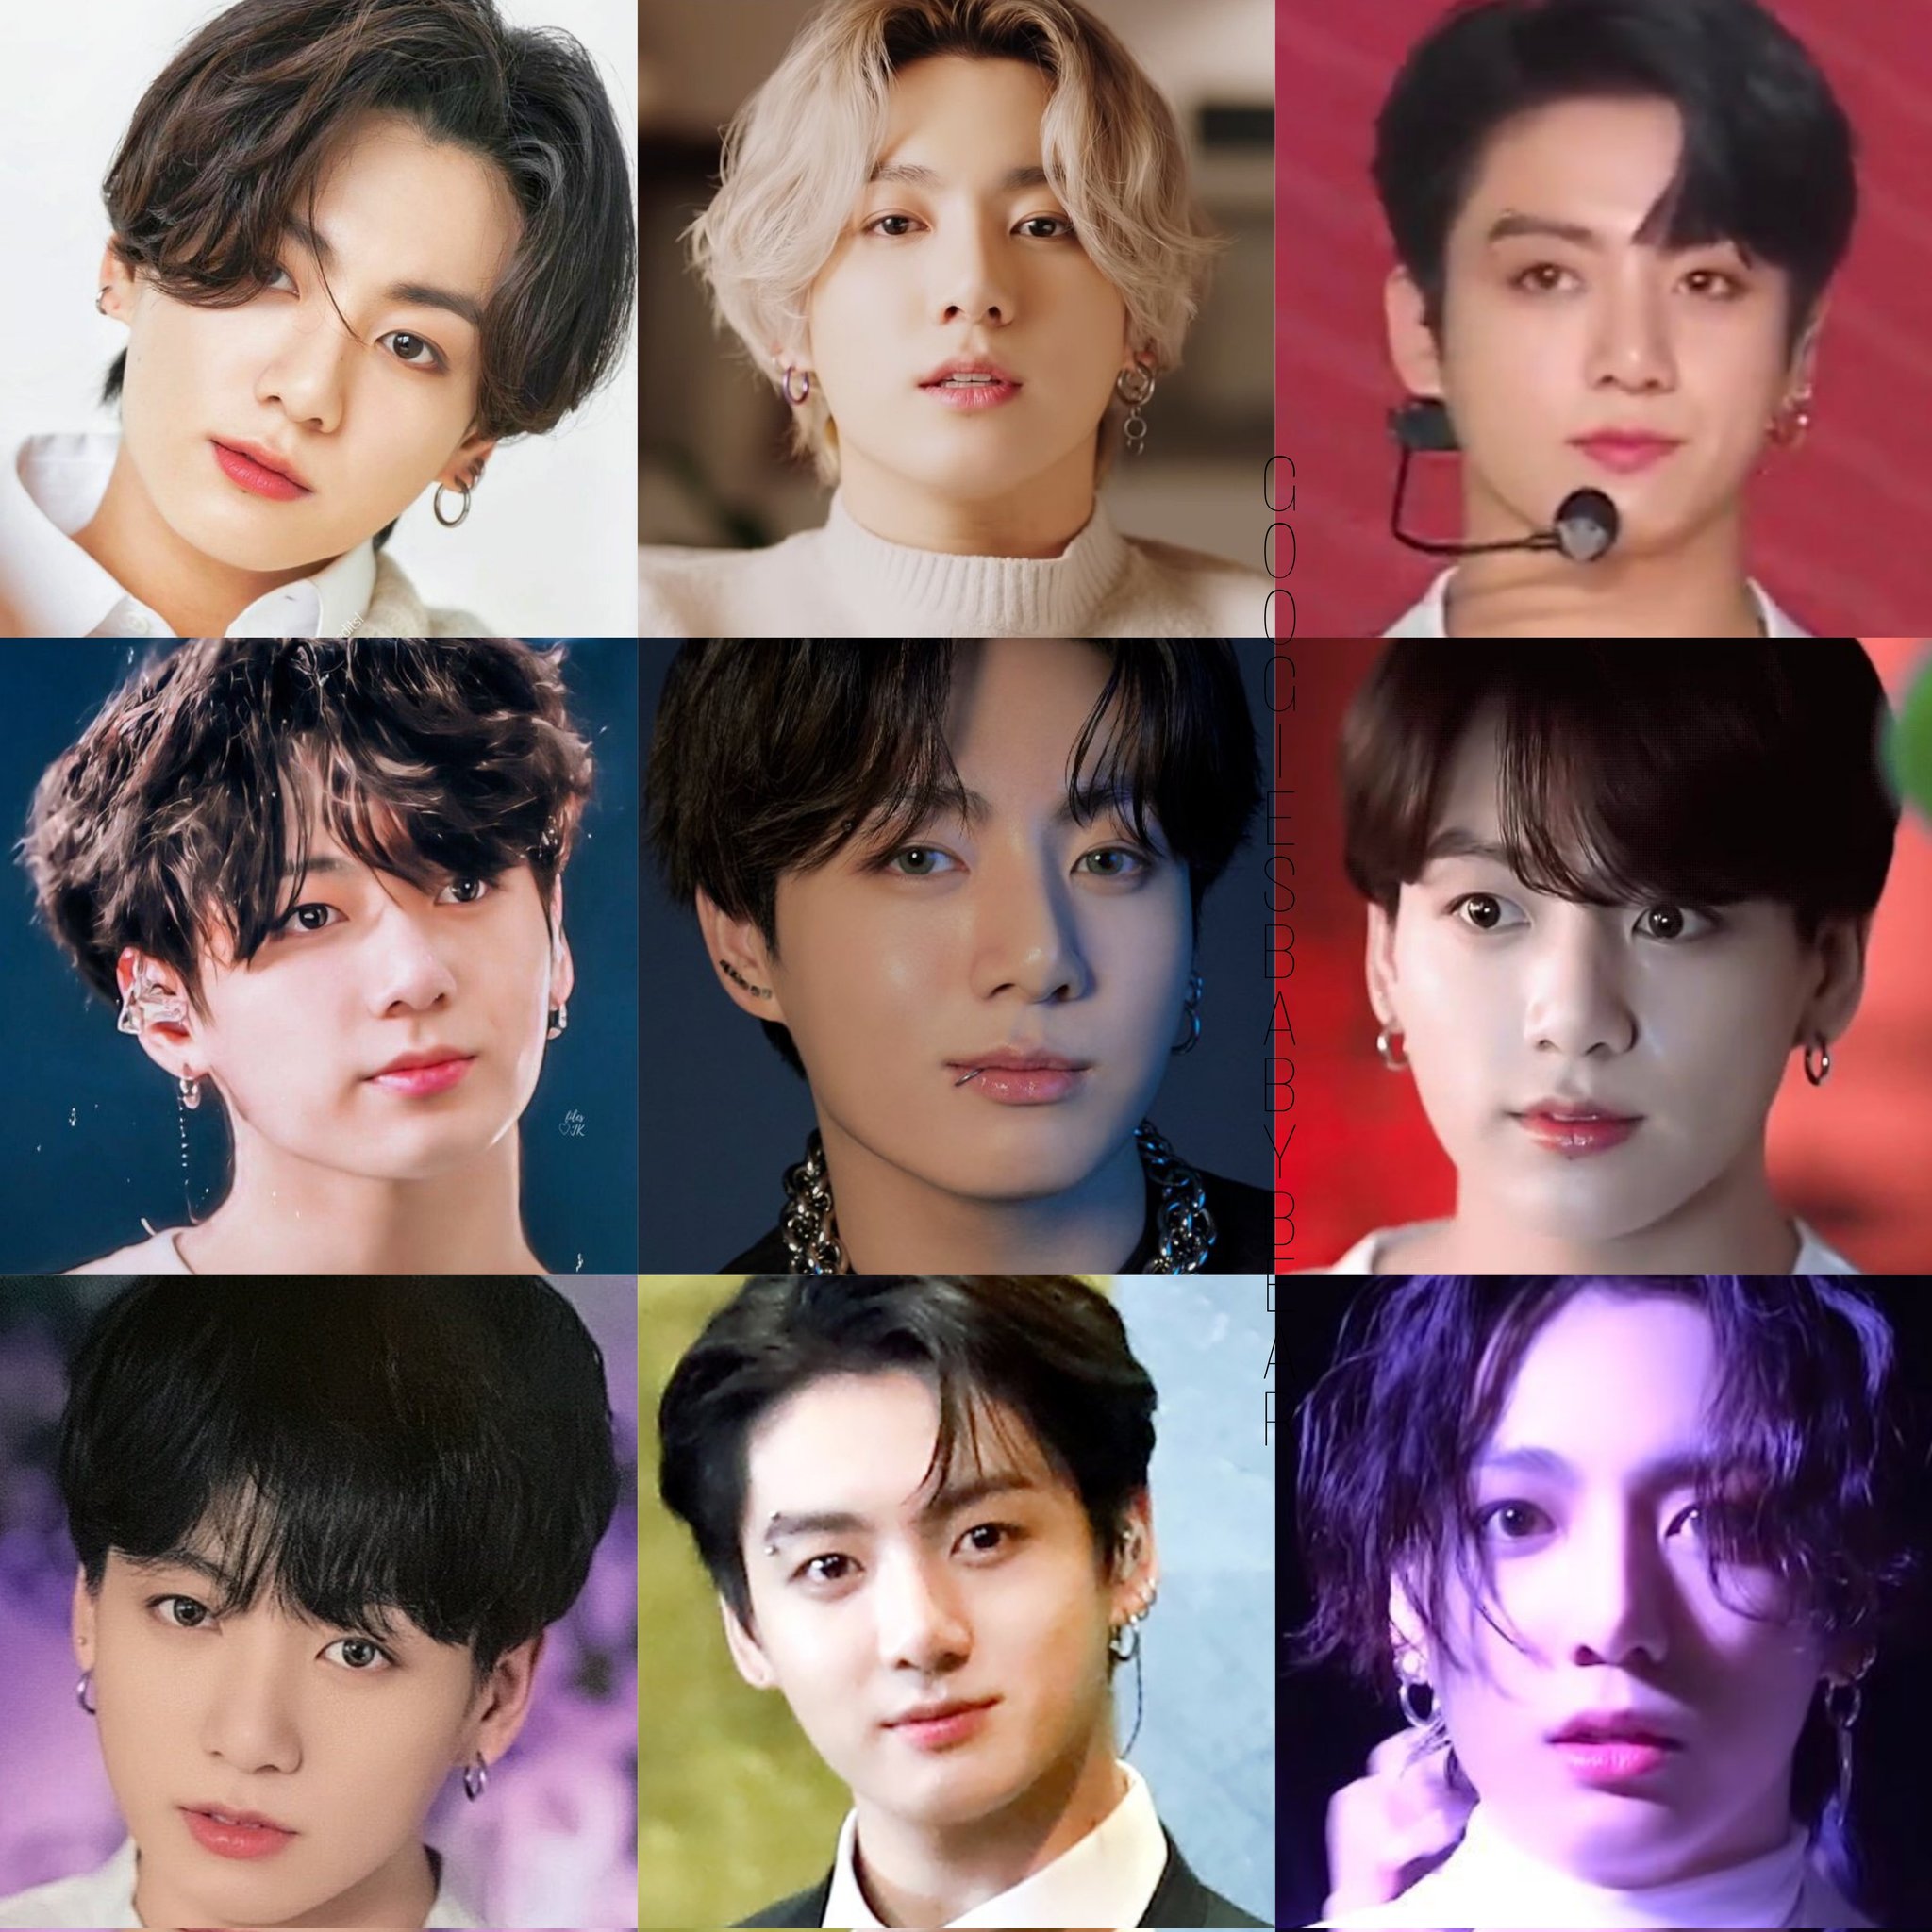 moon 🍓 🥛 on Twitter: "category is doll face and Jungkook win